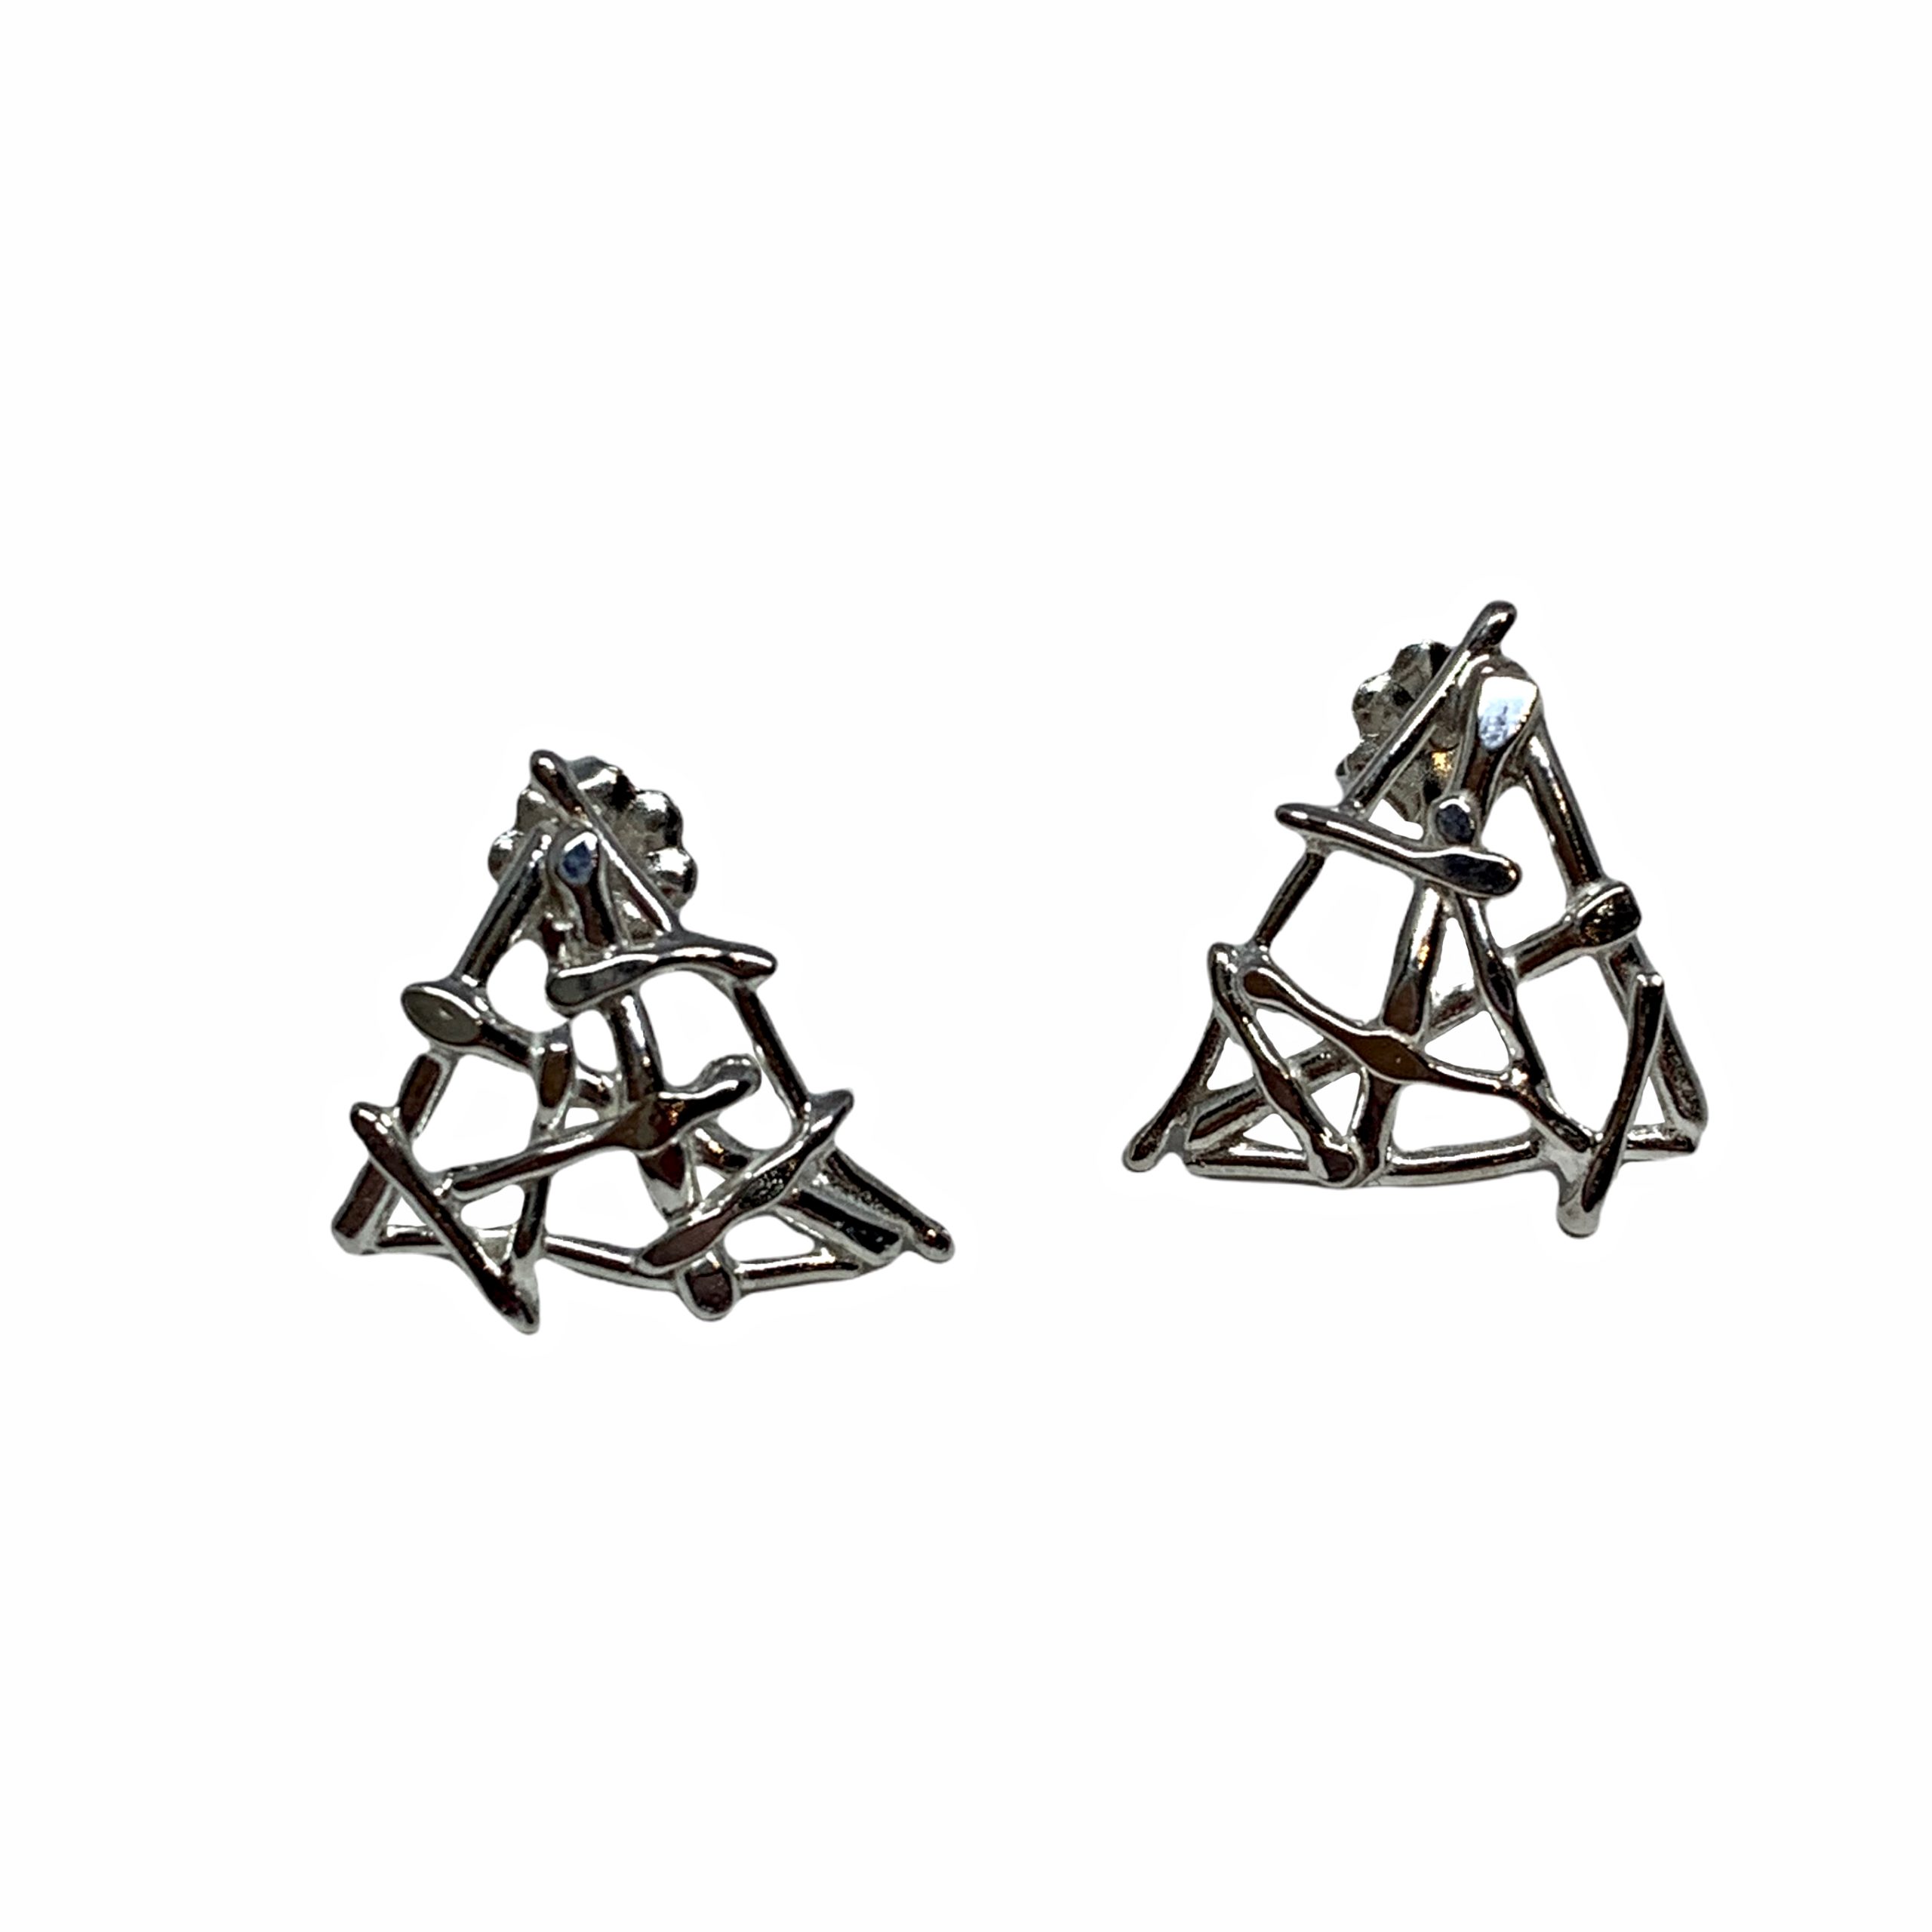 Handmade sterling silver earrings by A&R Jewellery | Effusion Art Gallery + Cast Glass Studio, Invermere BC